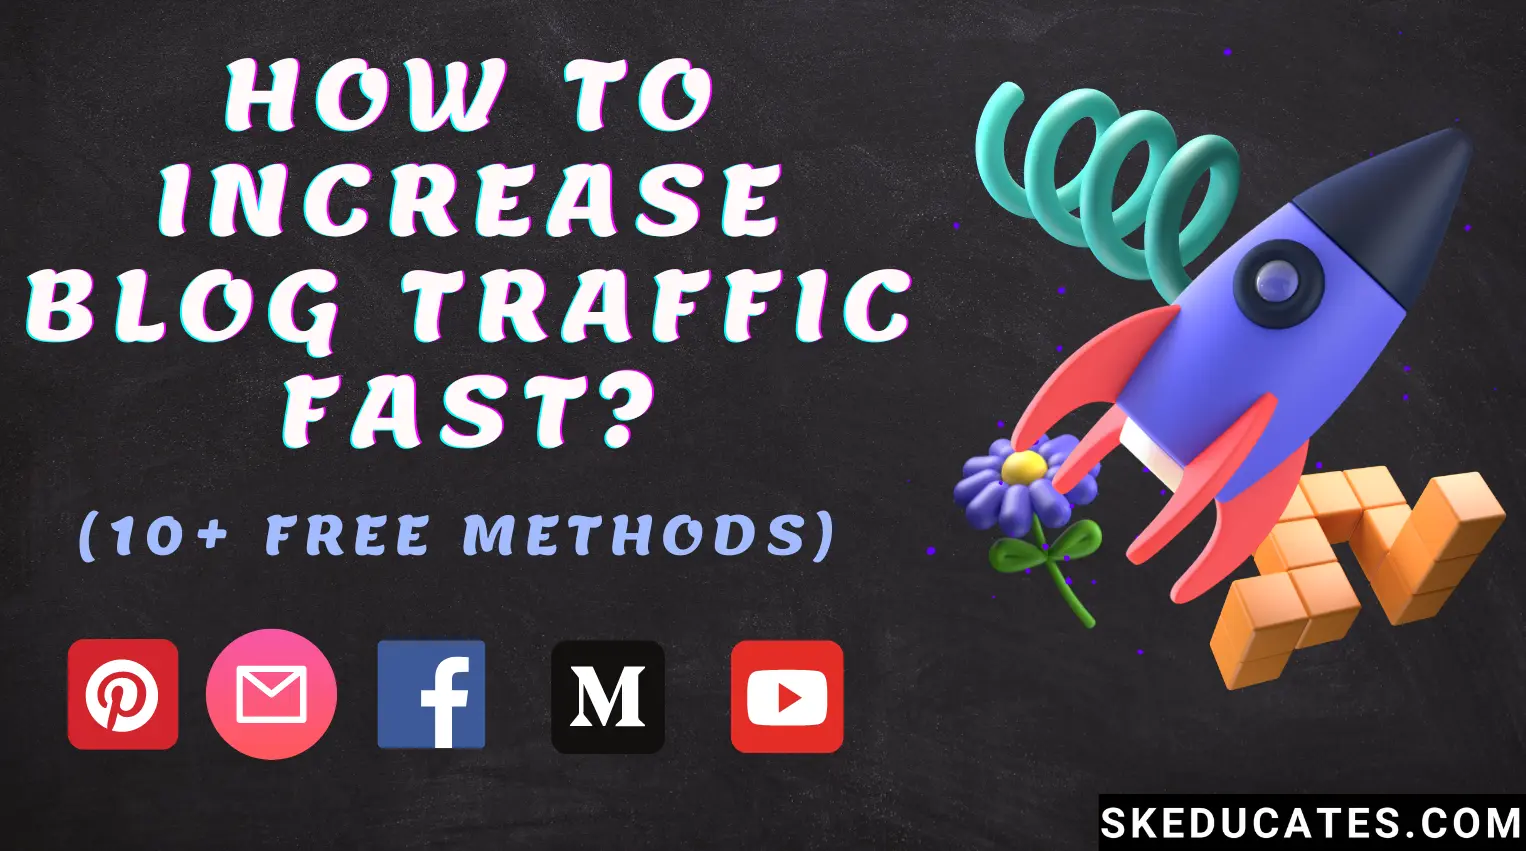 how-to-increase-blog-traffic-fast-skeducates